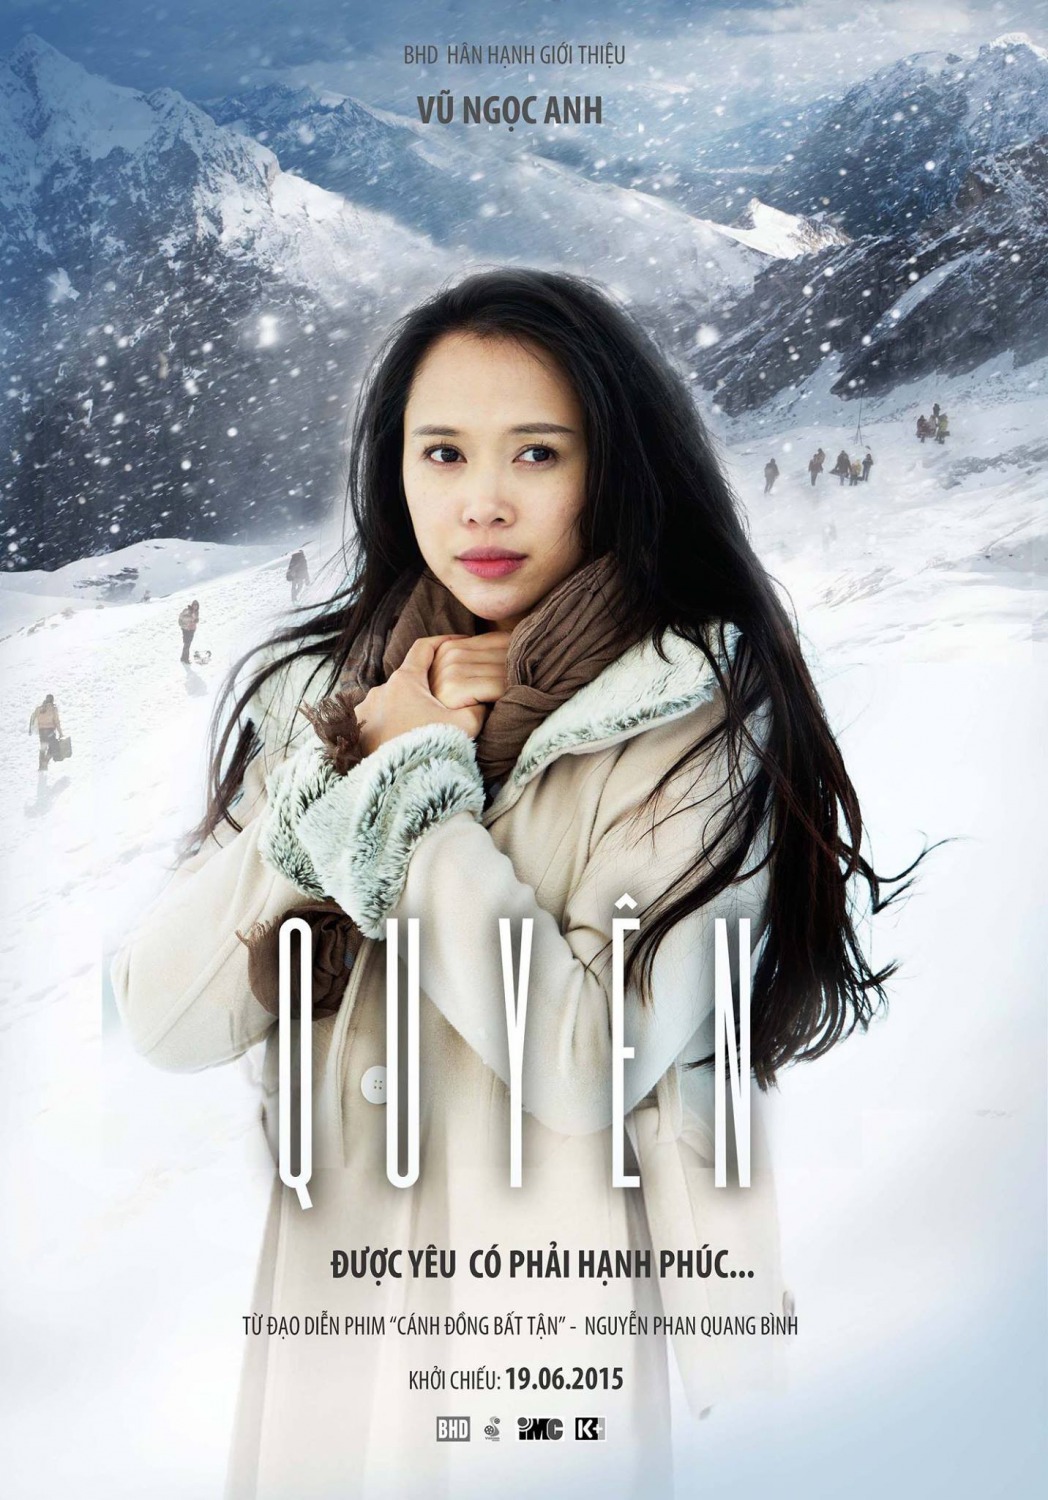 Extra Large Movie Poster Image for Quyên (#6 of 6)